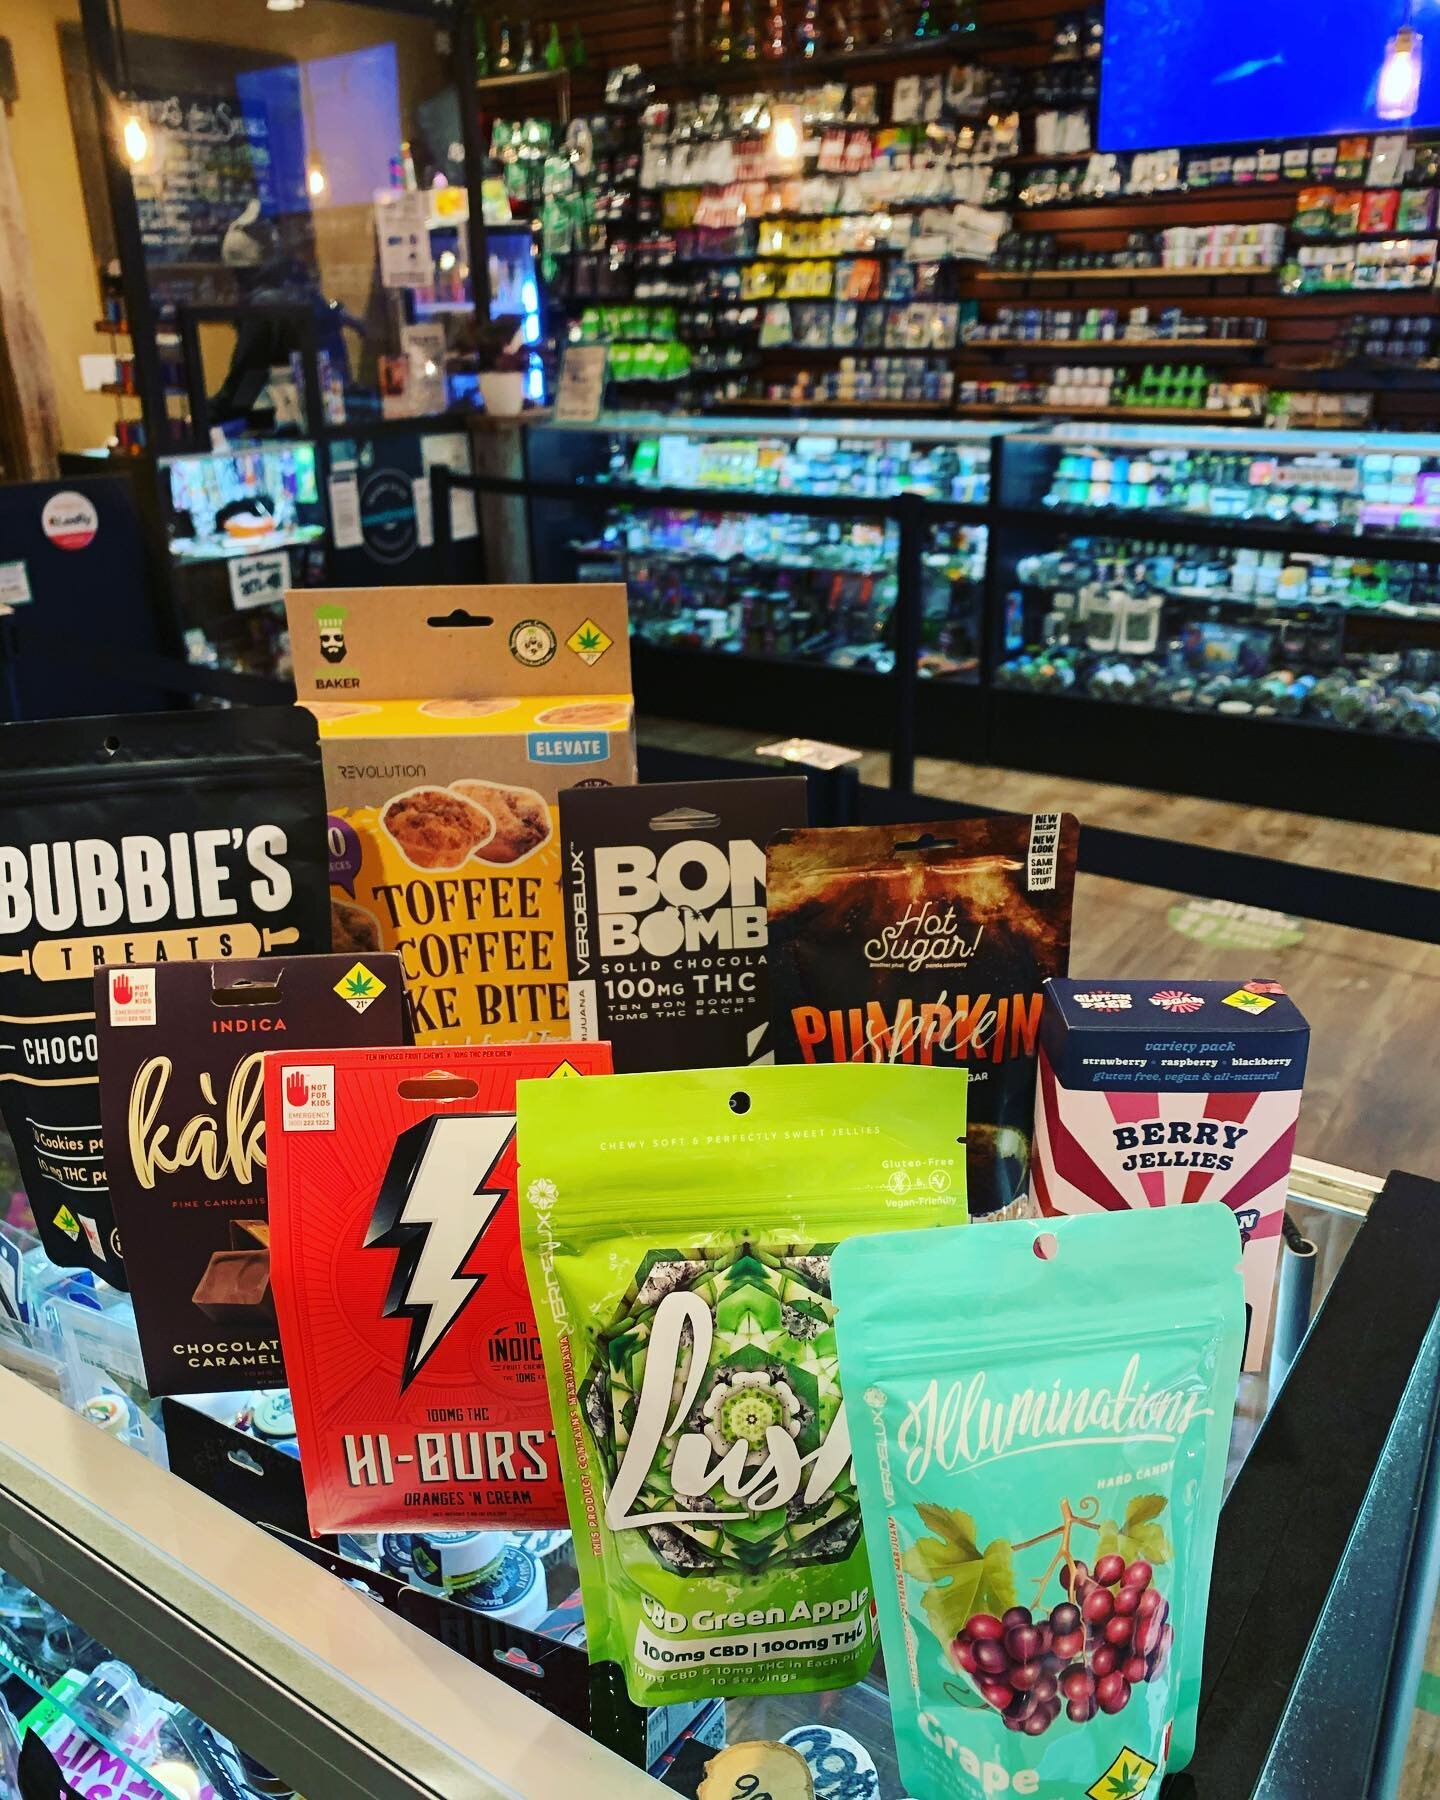 Good morning 😃 everyone, happy #munchiemonday! We&rsquo;ve got a PHATTY selection for all your cravings 🤤🍎🍉🍇🍪🧃🍬🍫
&bull;
&bull;
&bull;
#munchiesfordays #letsgrub #infusedtreats #letsgetlit #wakenbake #edibles #selectionfordays

❌WARNING: This